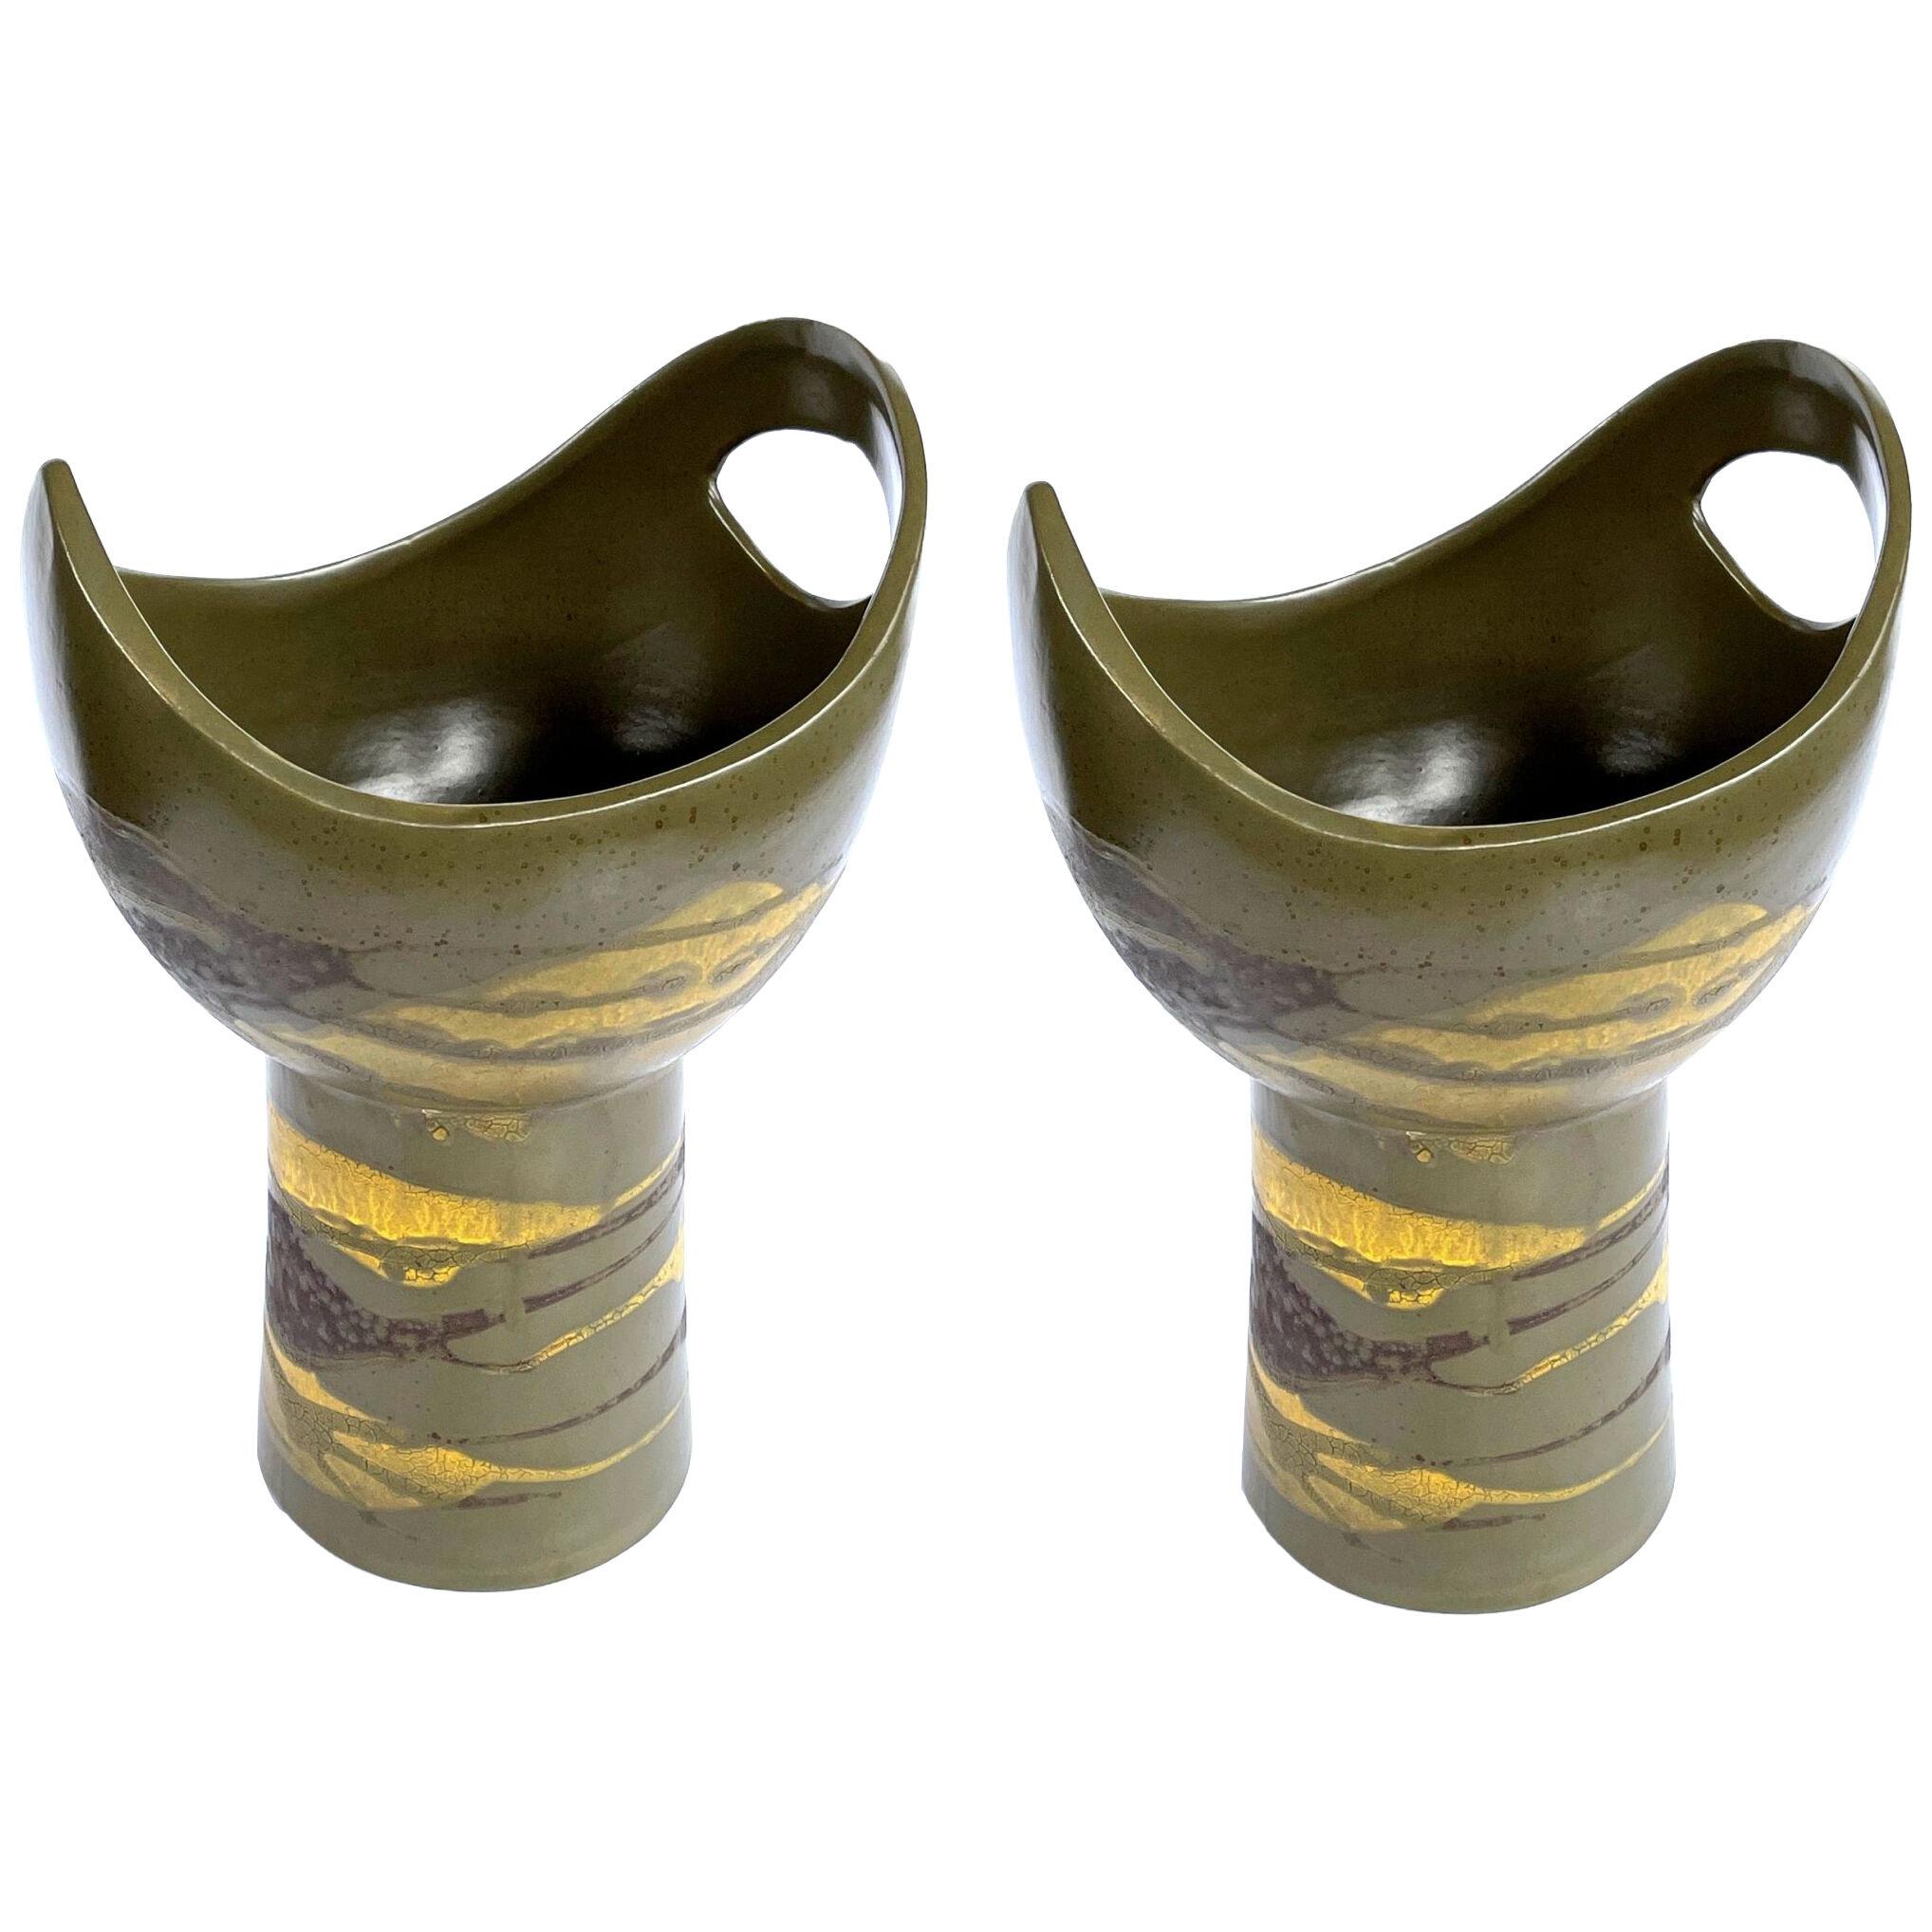 Pr Royal Haeger Cup-Shaped Vases w Brown&Yellow Drip Glaze on Olive Green Ground